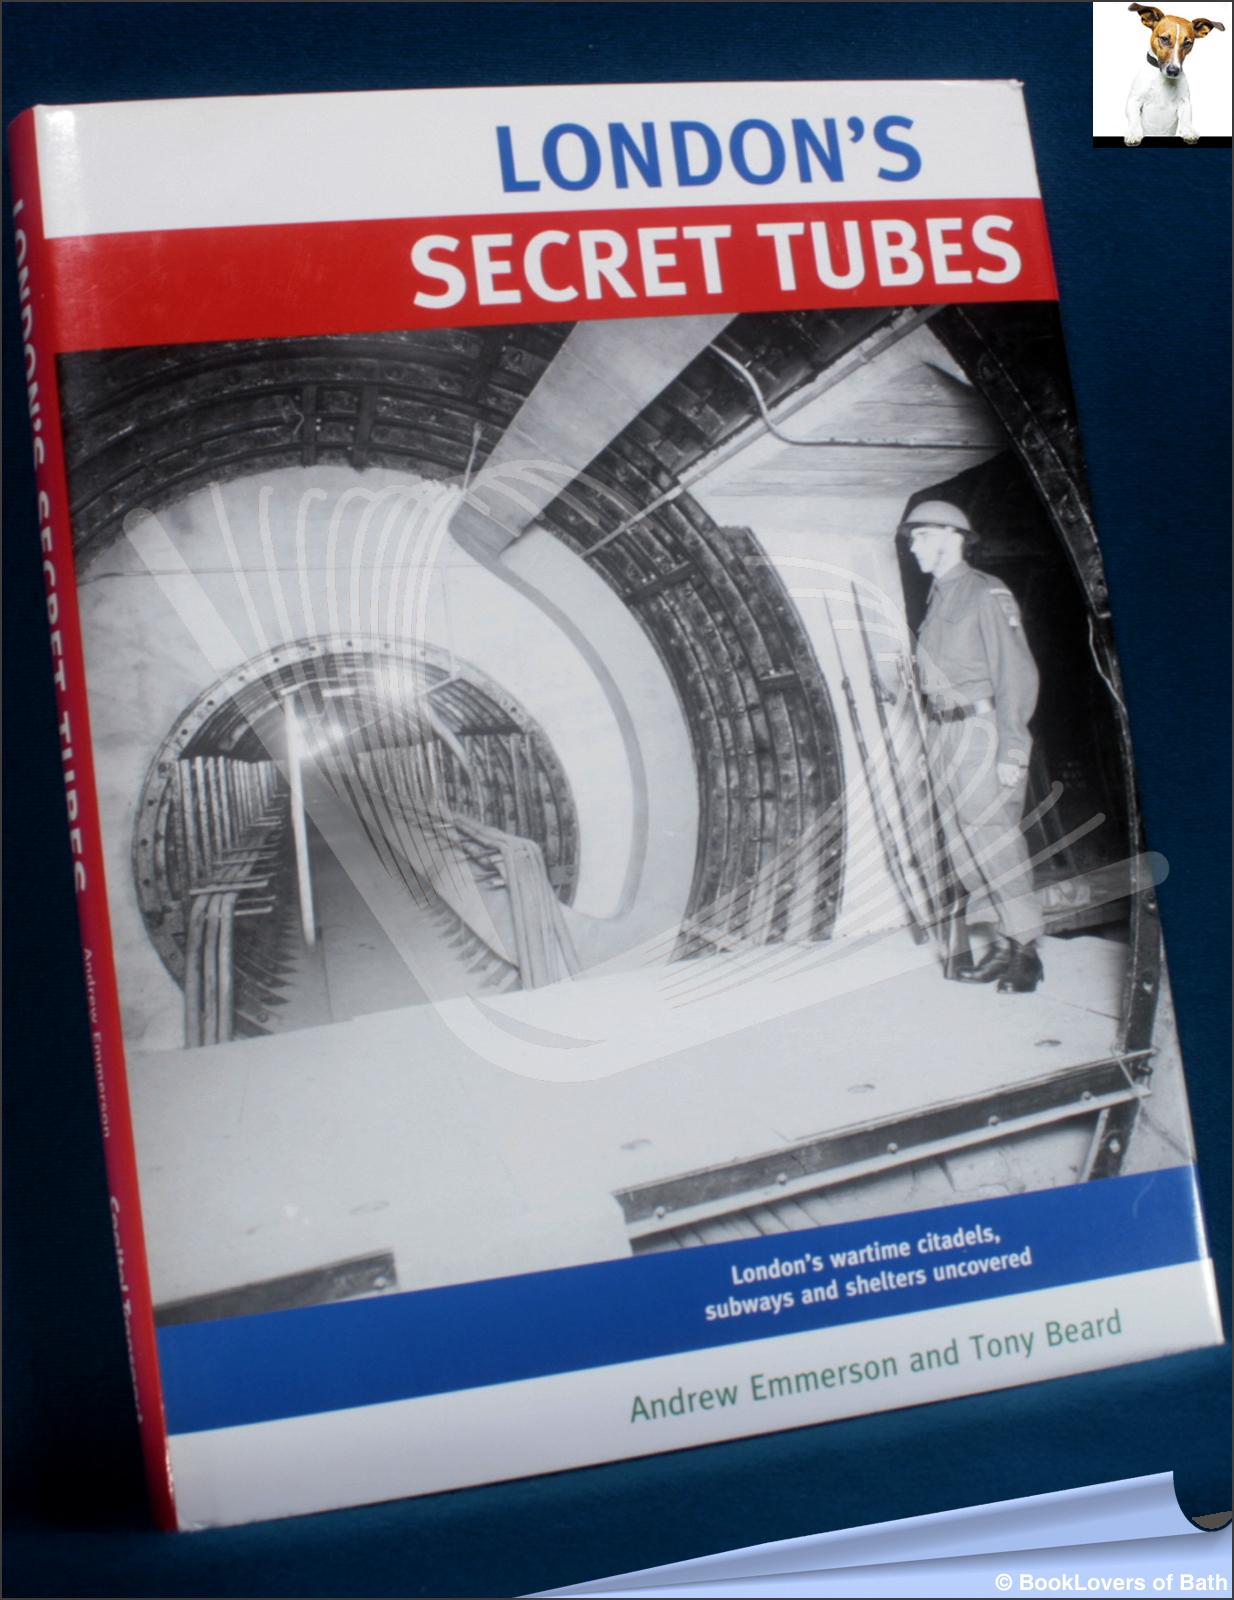 London's Secret Tubes: London's Wartime Citadels, Subways and Shelters Uncovered - Andrew Emmerson, Tony Beard & Members Of Subterranea Britannica